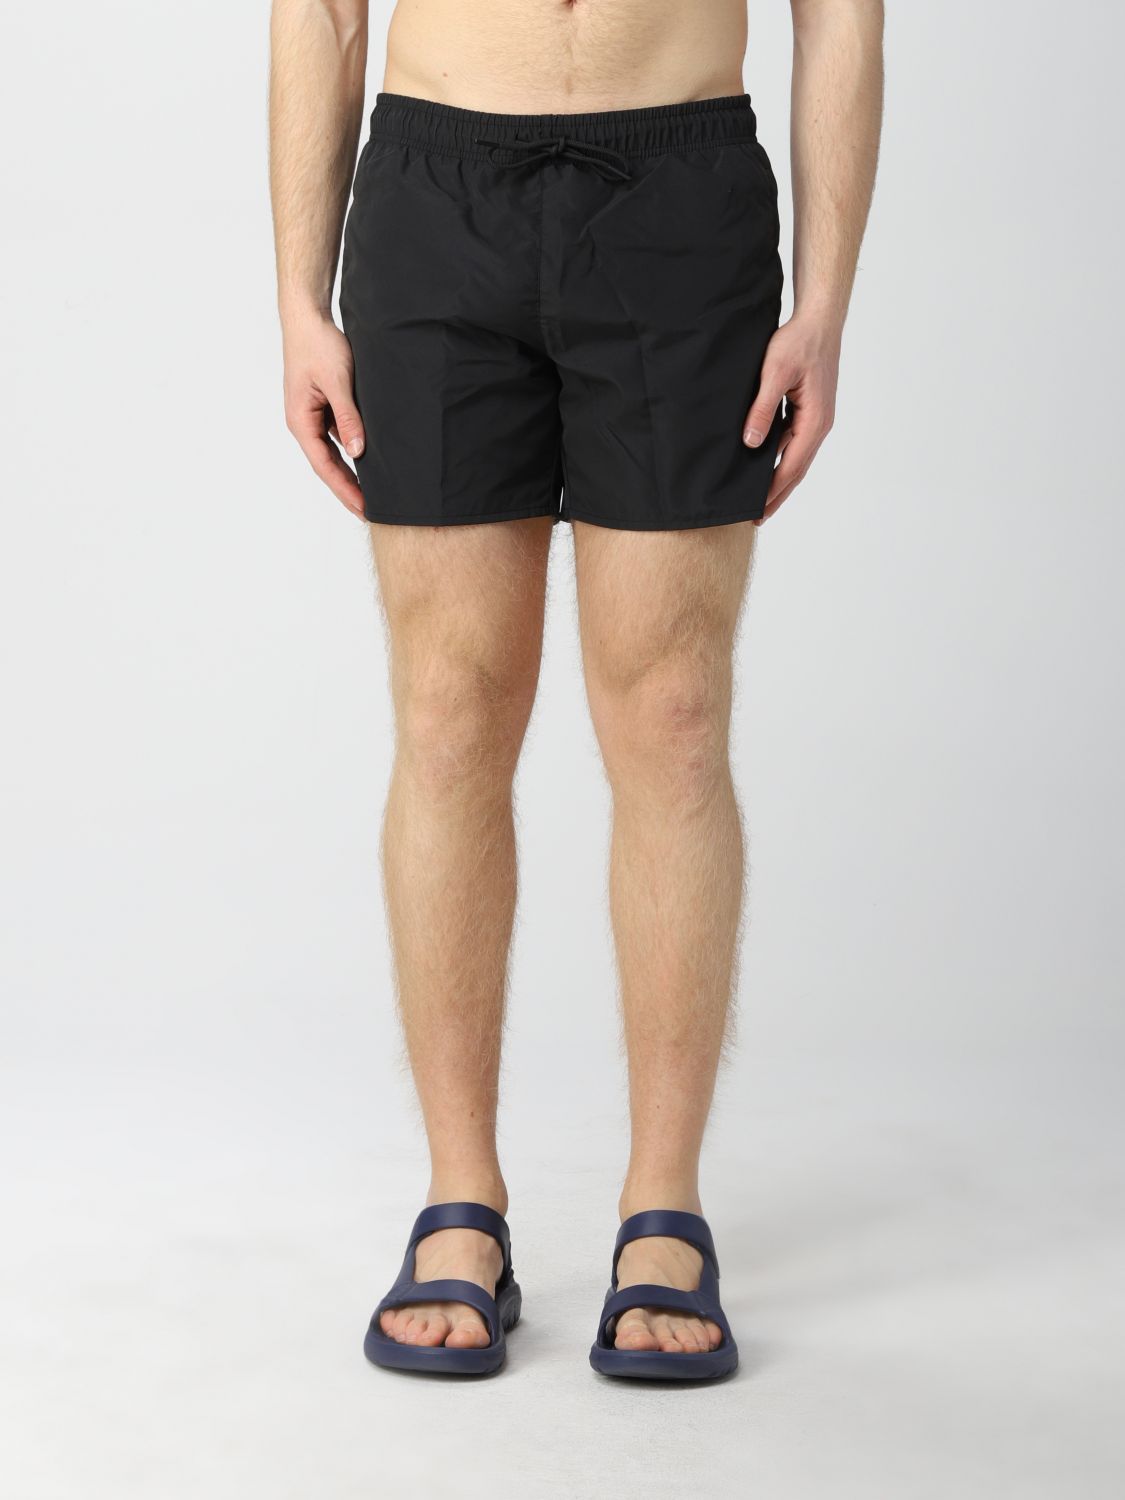 LACOSTE: swimsuit for man - Black | Lacoste swimsuit MH6270 online on ...